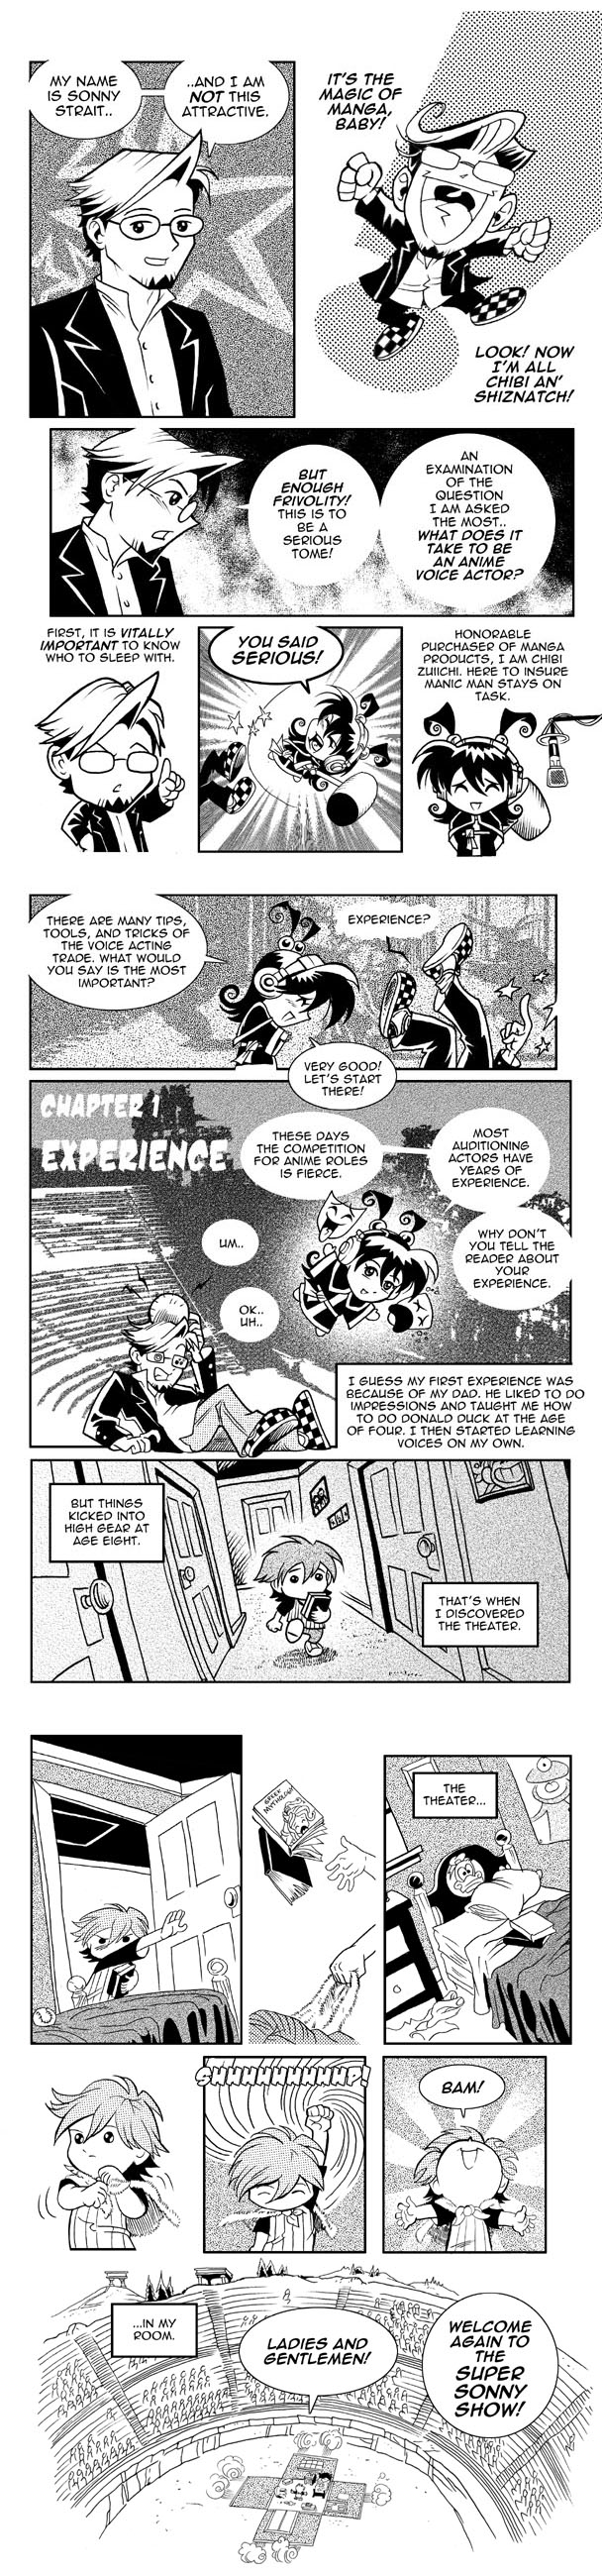 manga_guide_new_page_by_sonion